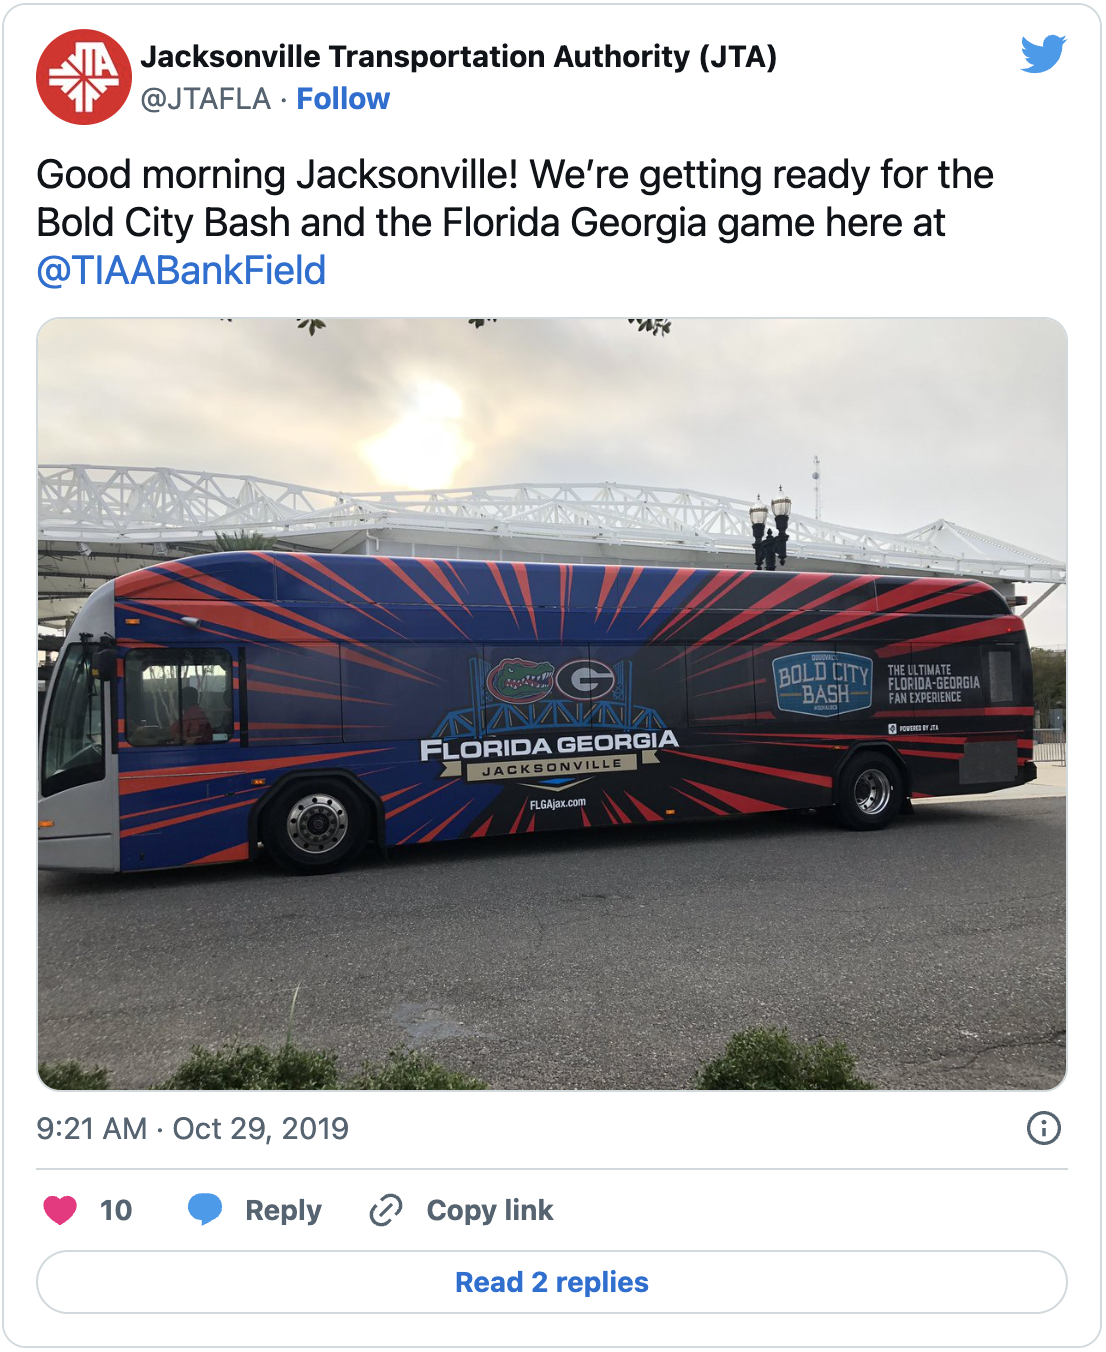 A tweet promoting the 2019 Florida-Georgia football game in Jacksonville, with a specially designed bus wrap on a JTA bus.